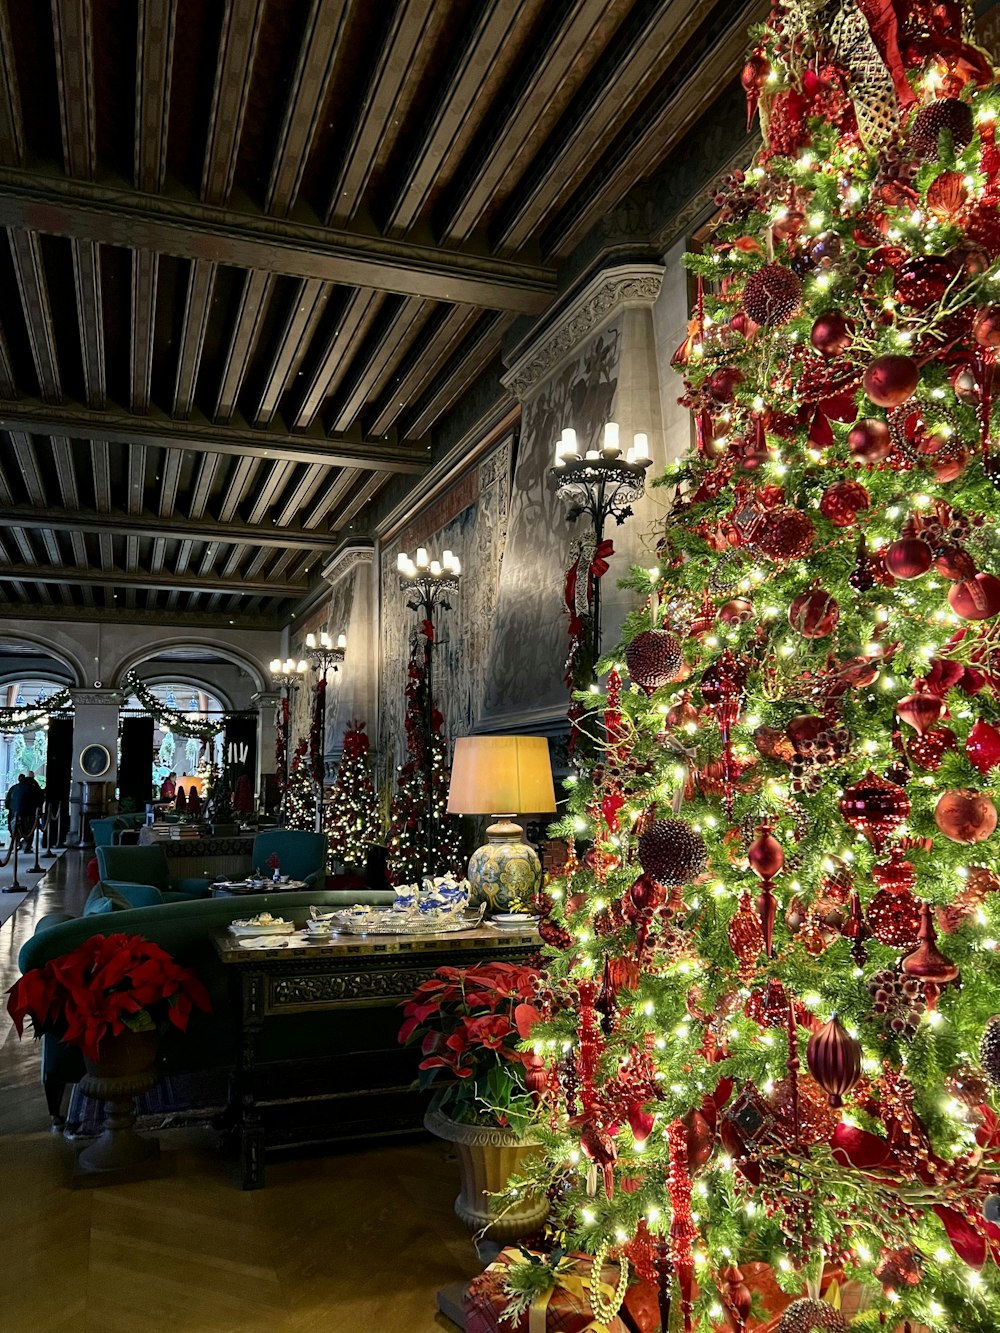 a decorated christmas tree in a large room